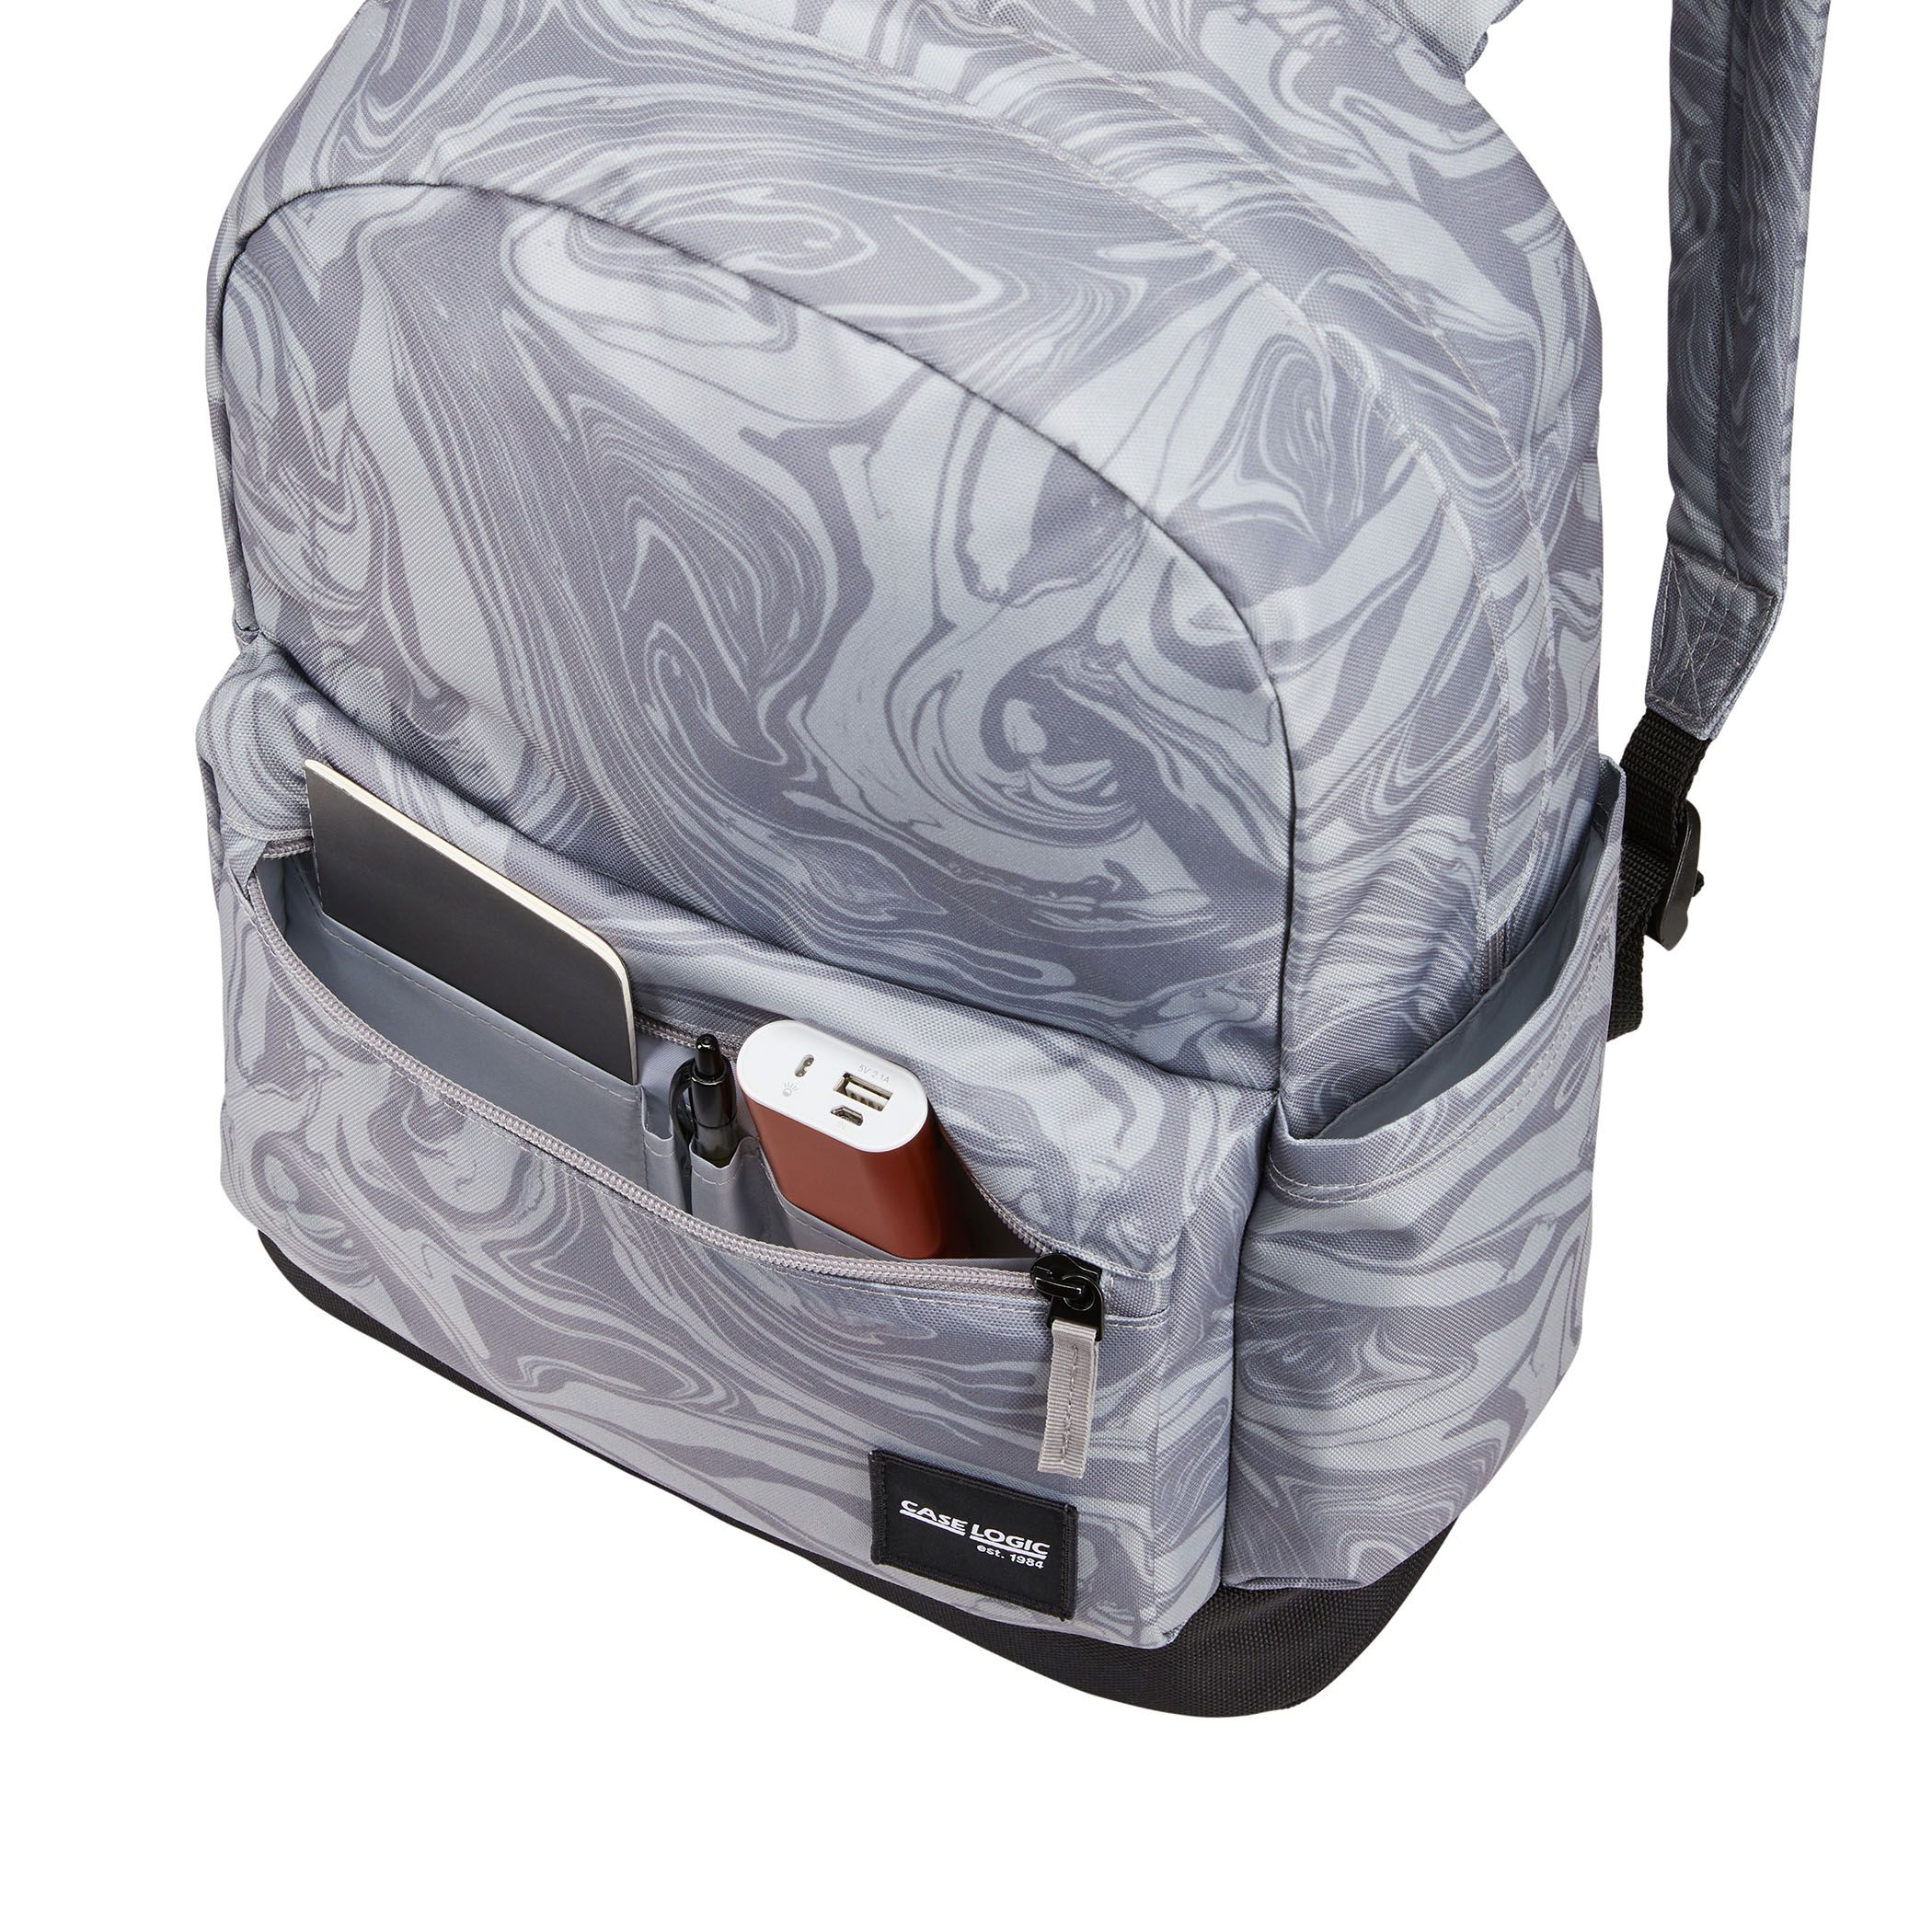 Case Logic Commence Recycled Backpack recycled backpack